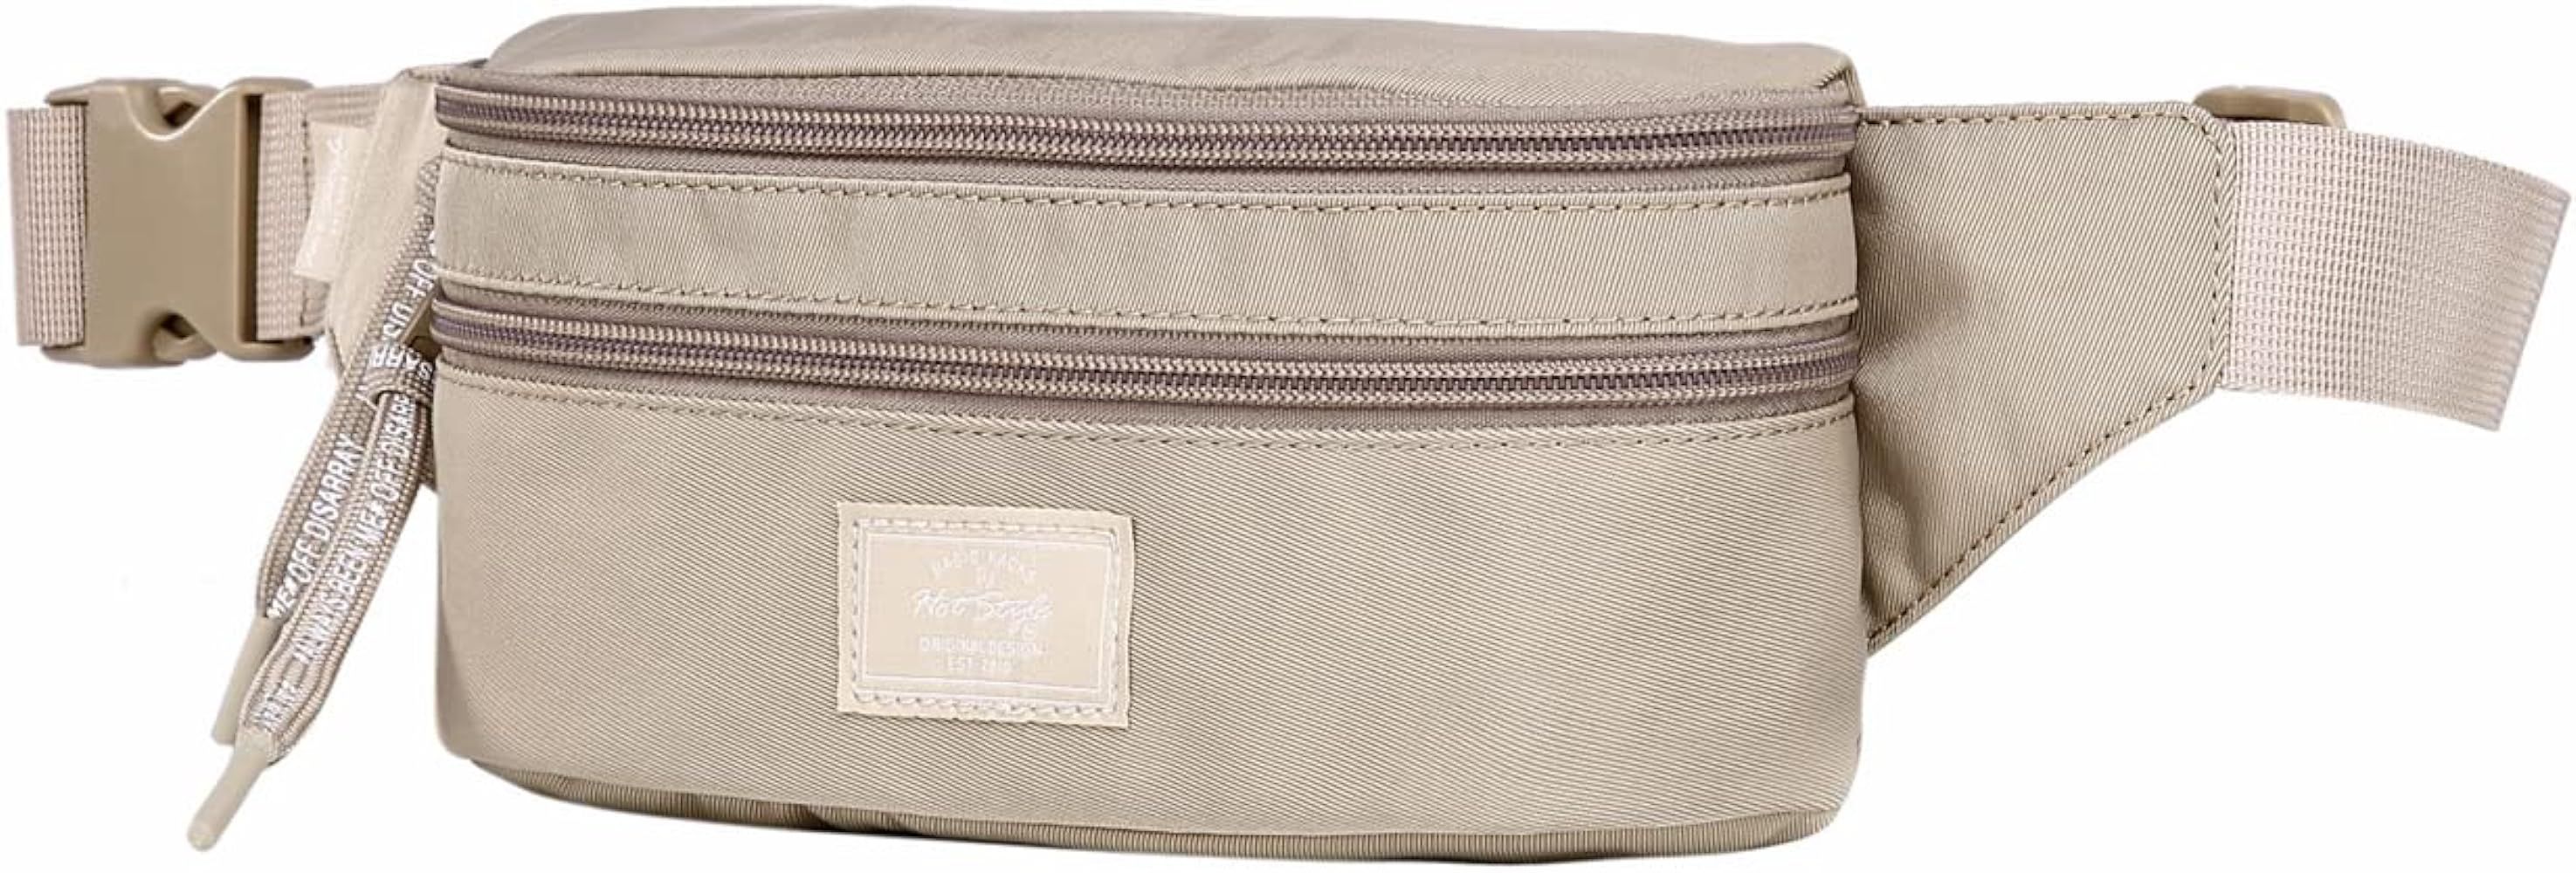 HotStyle 521s Small Fanny Pack Waist Bag for Women, 8.0"x2.5"x4.3" | Amazon (US)